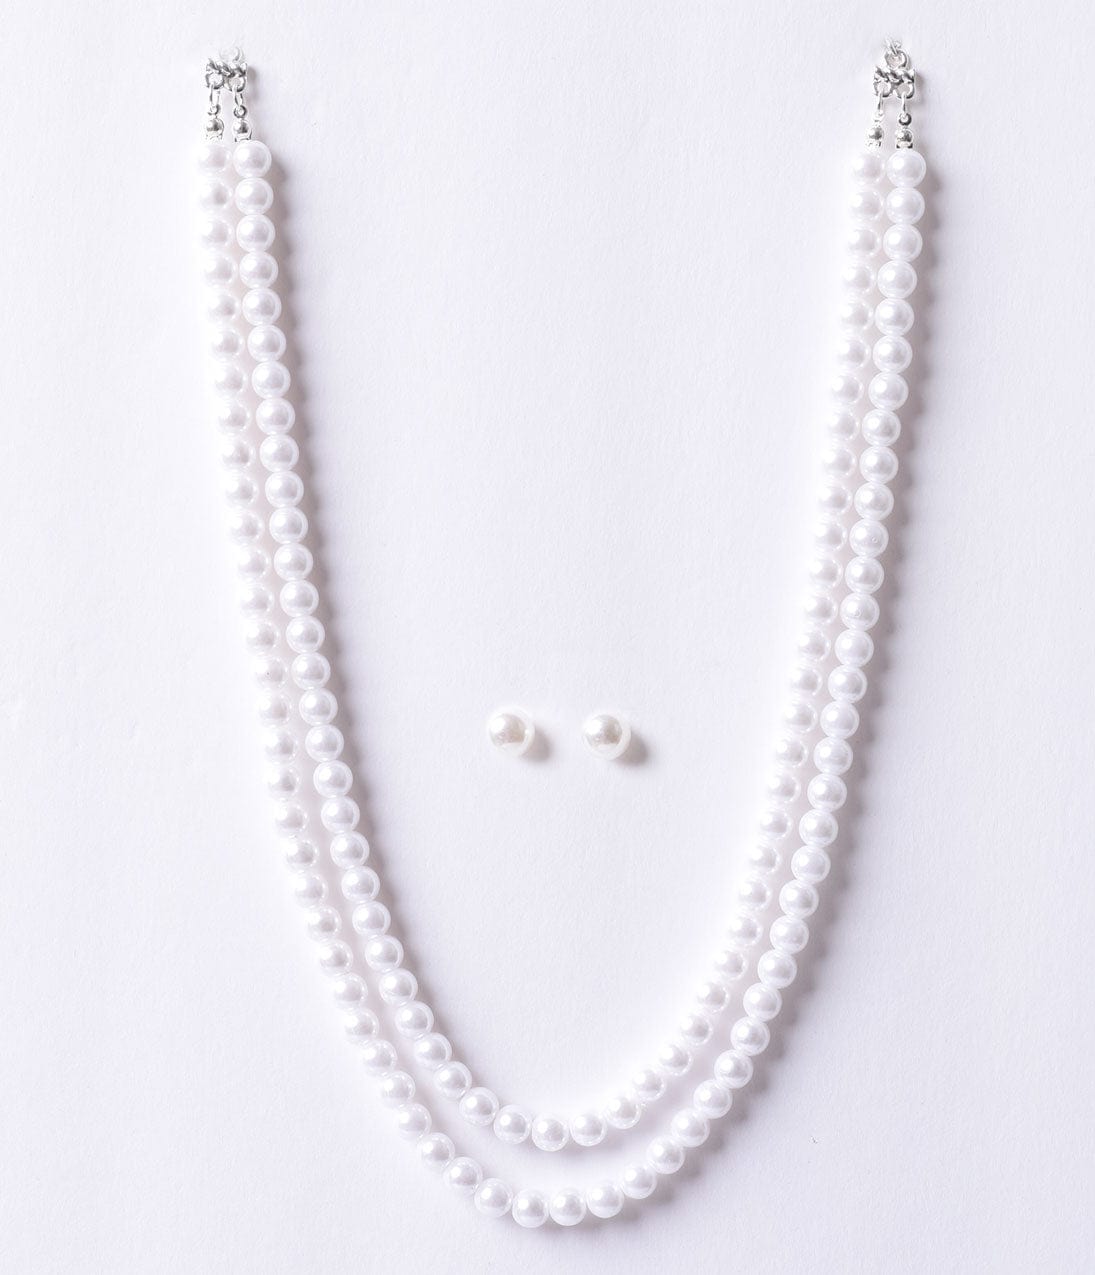 7 Ways To Tell If Pearls Are Real: Simple Failsafe Guide